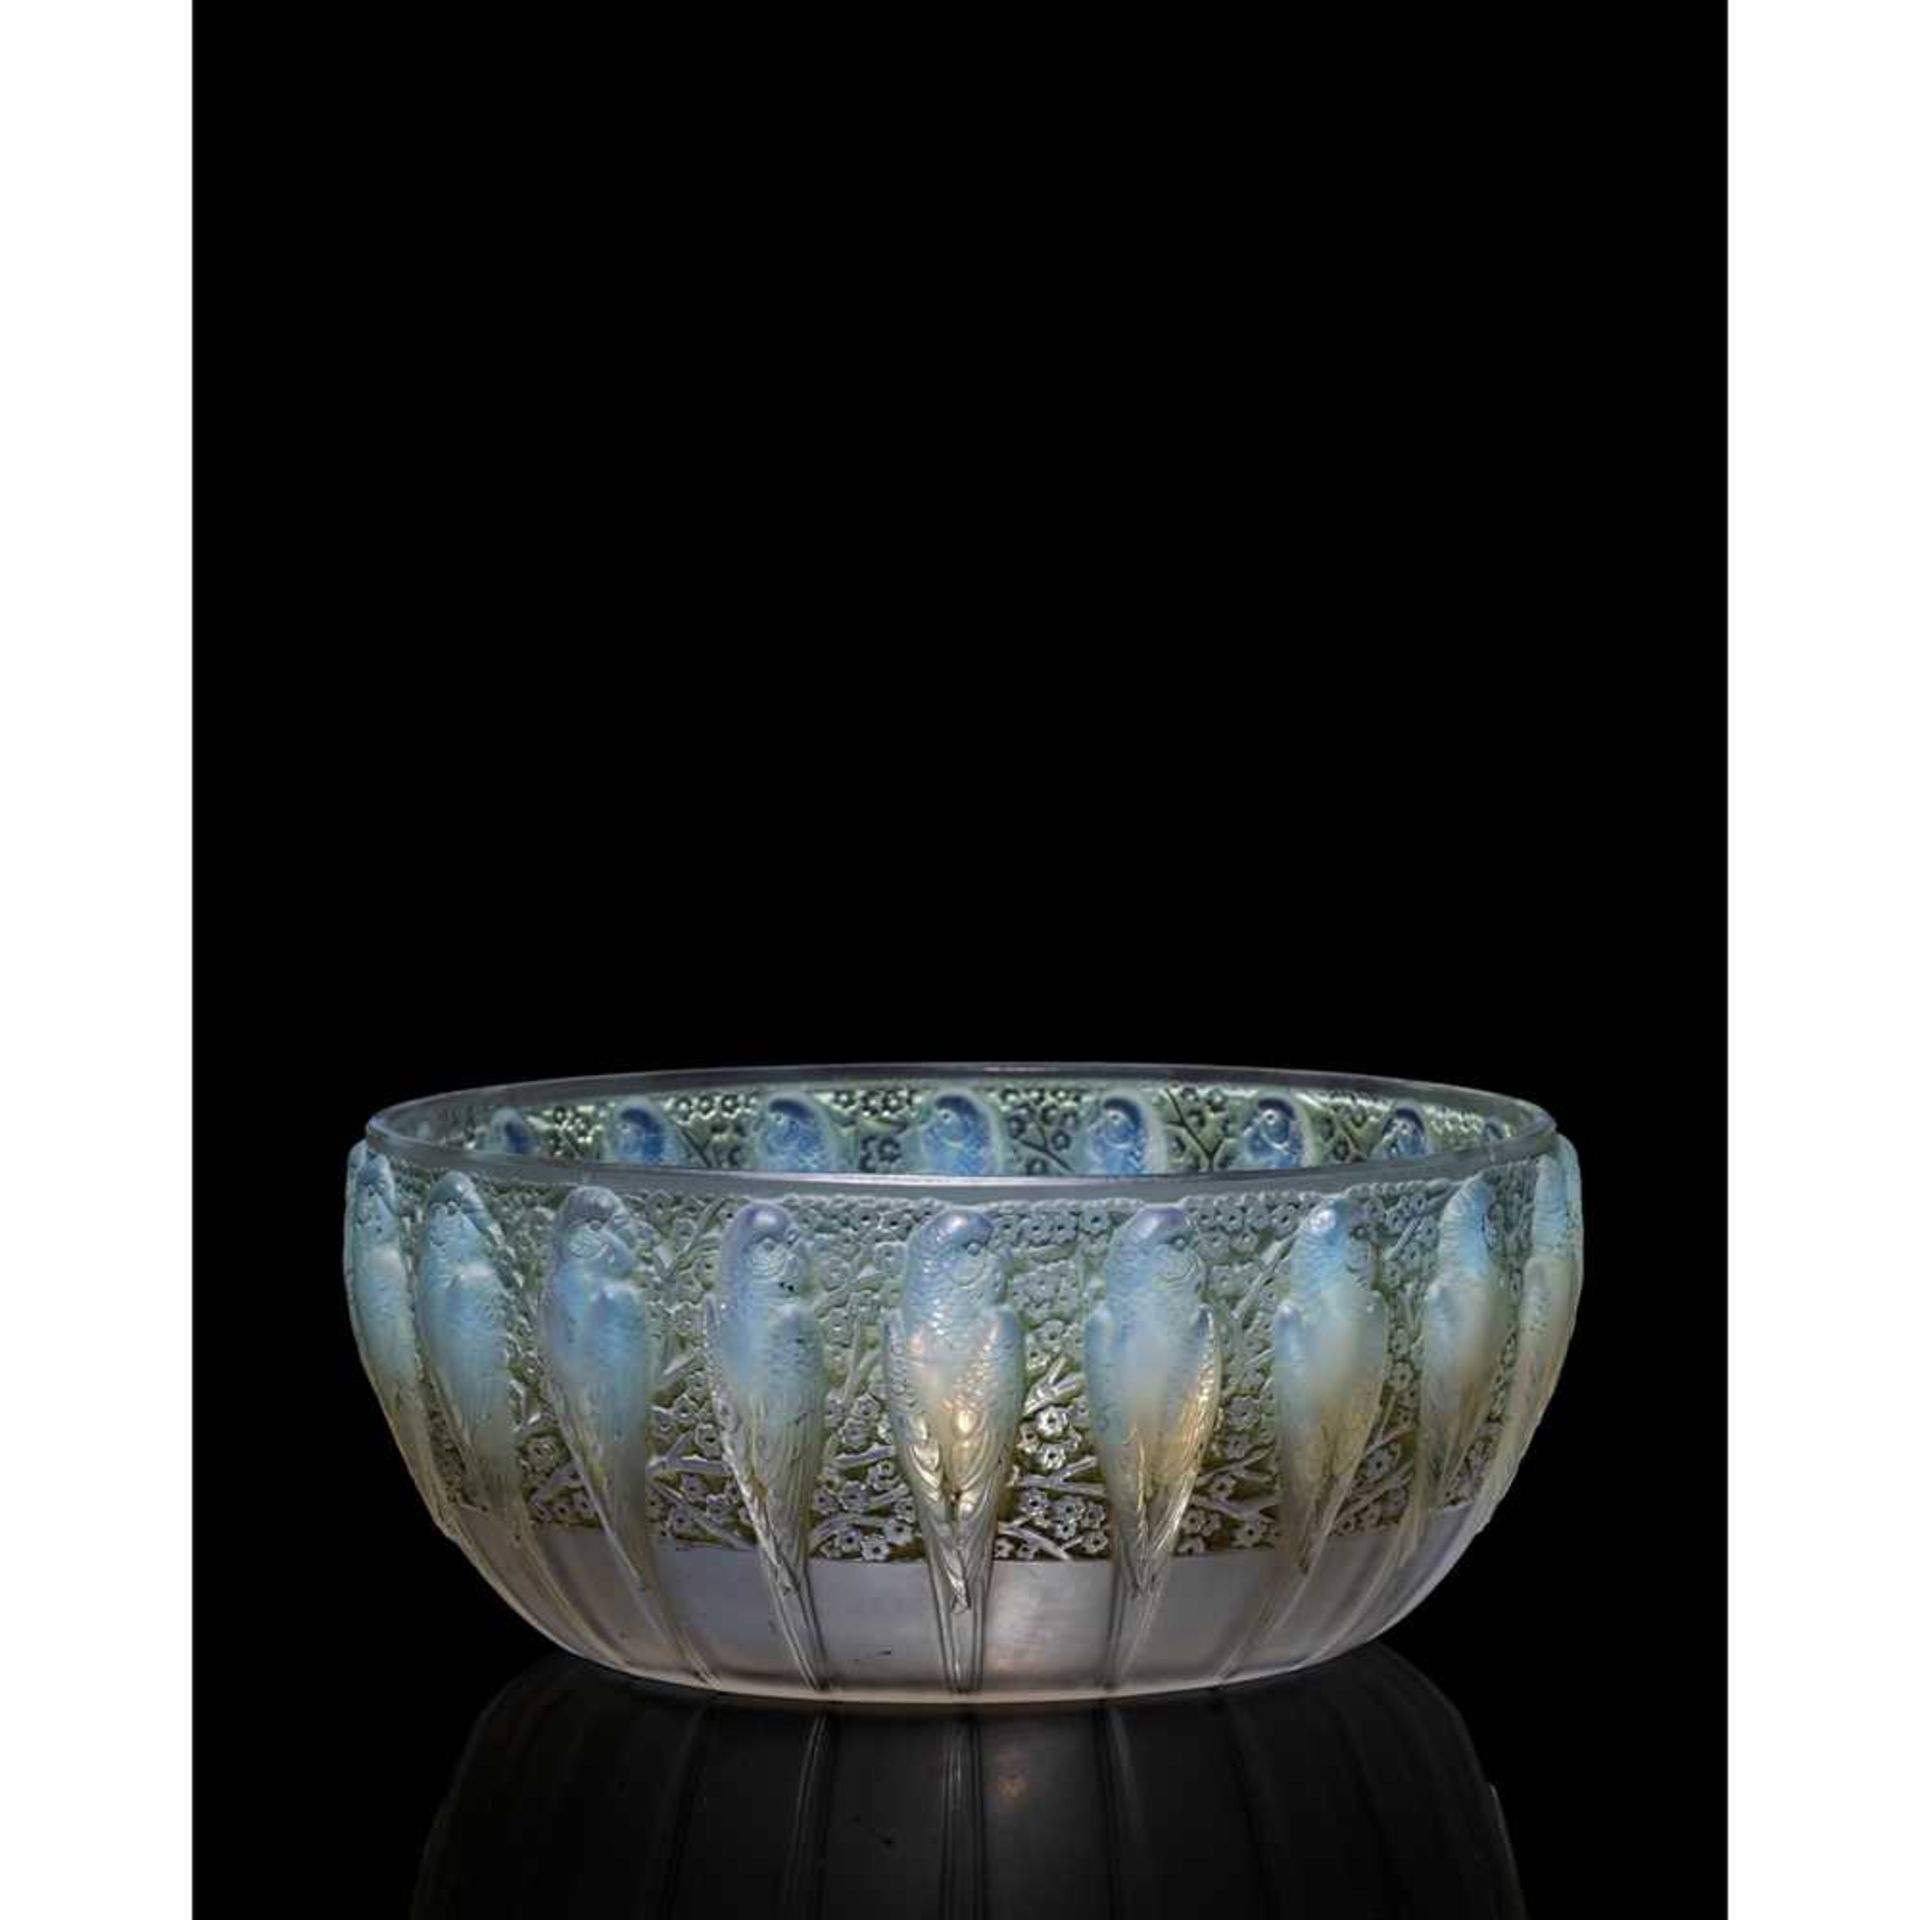 René Lalique (French 1860-1945) PERRUCHES BOWL, NO. 419 - Image 2 of 2